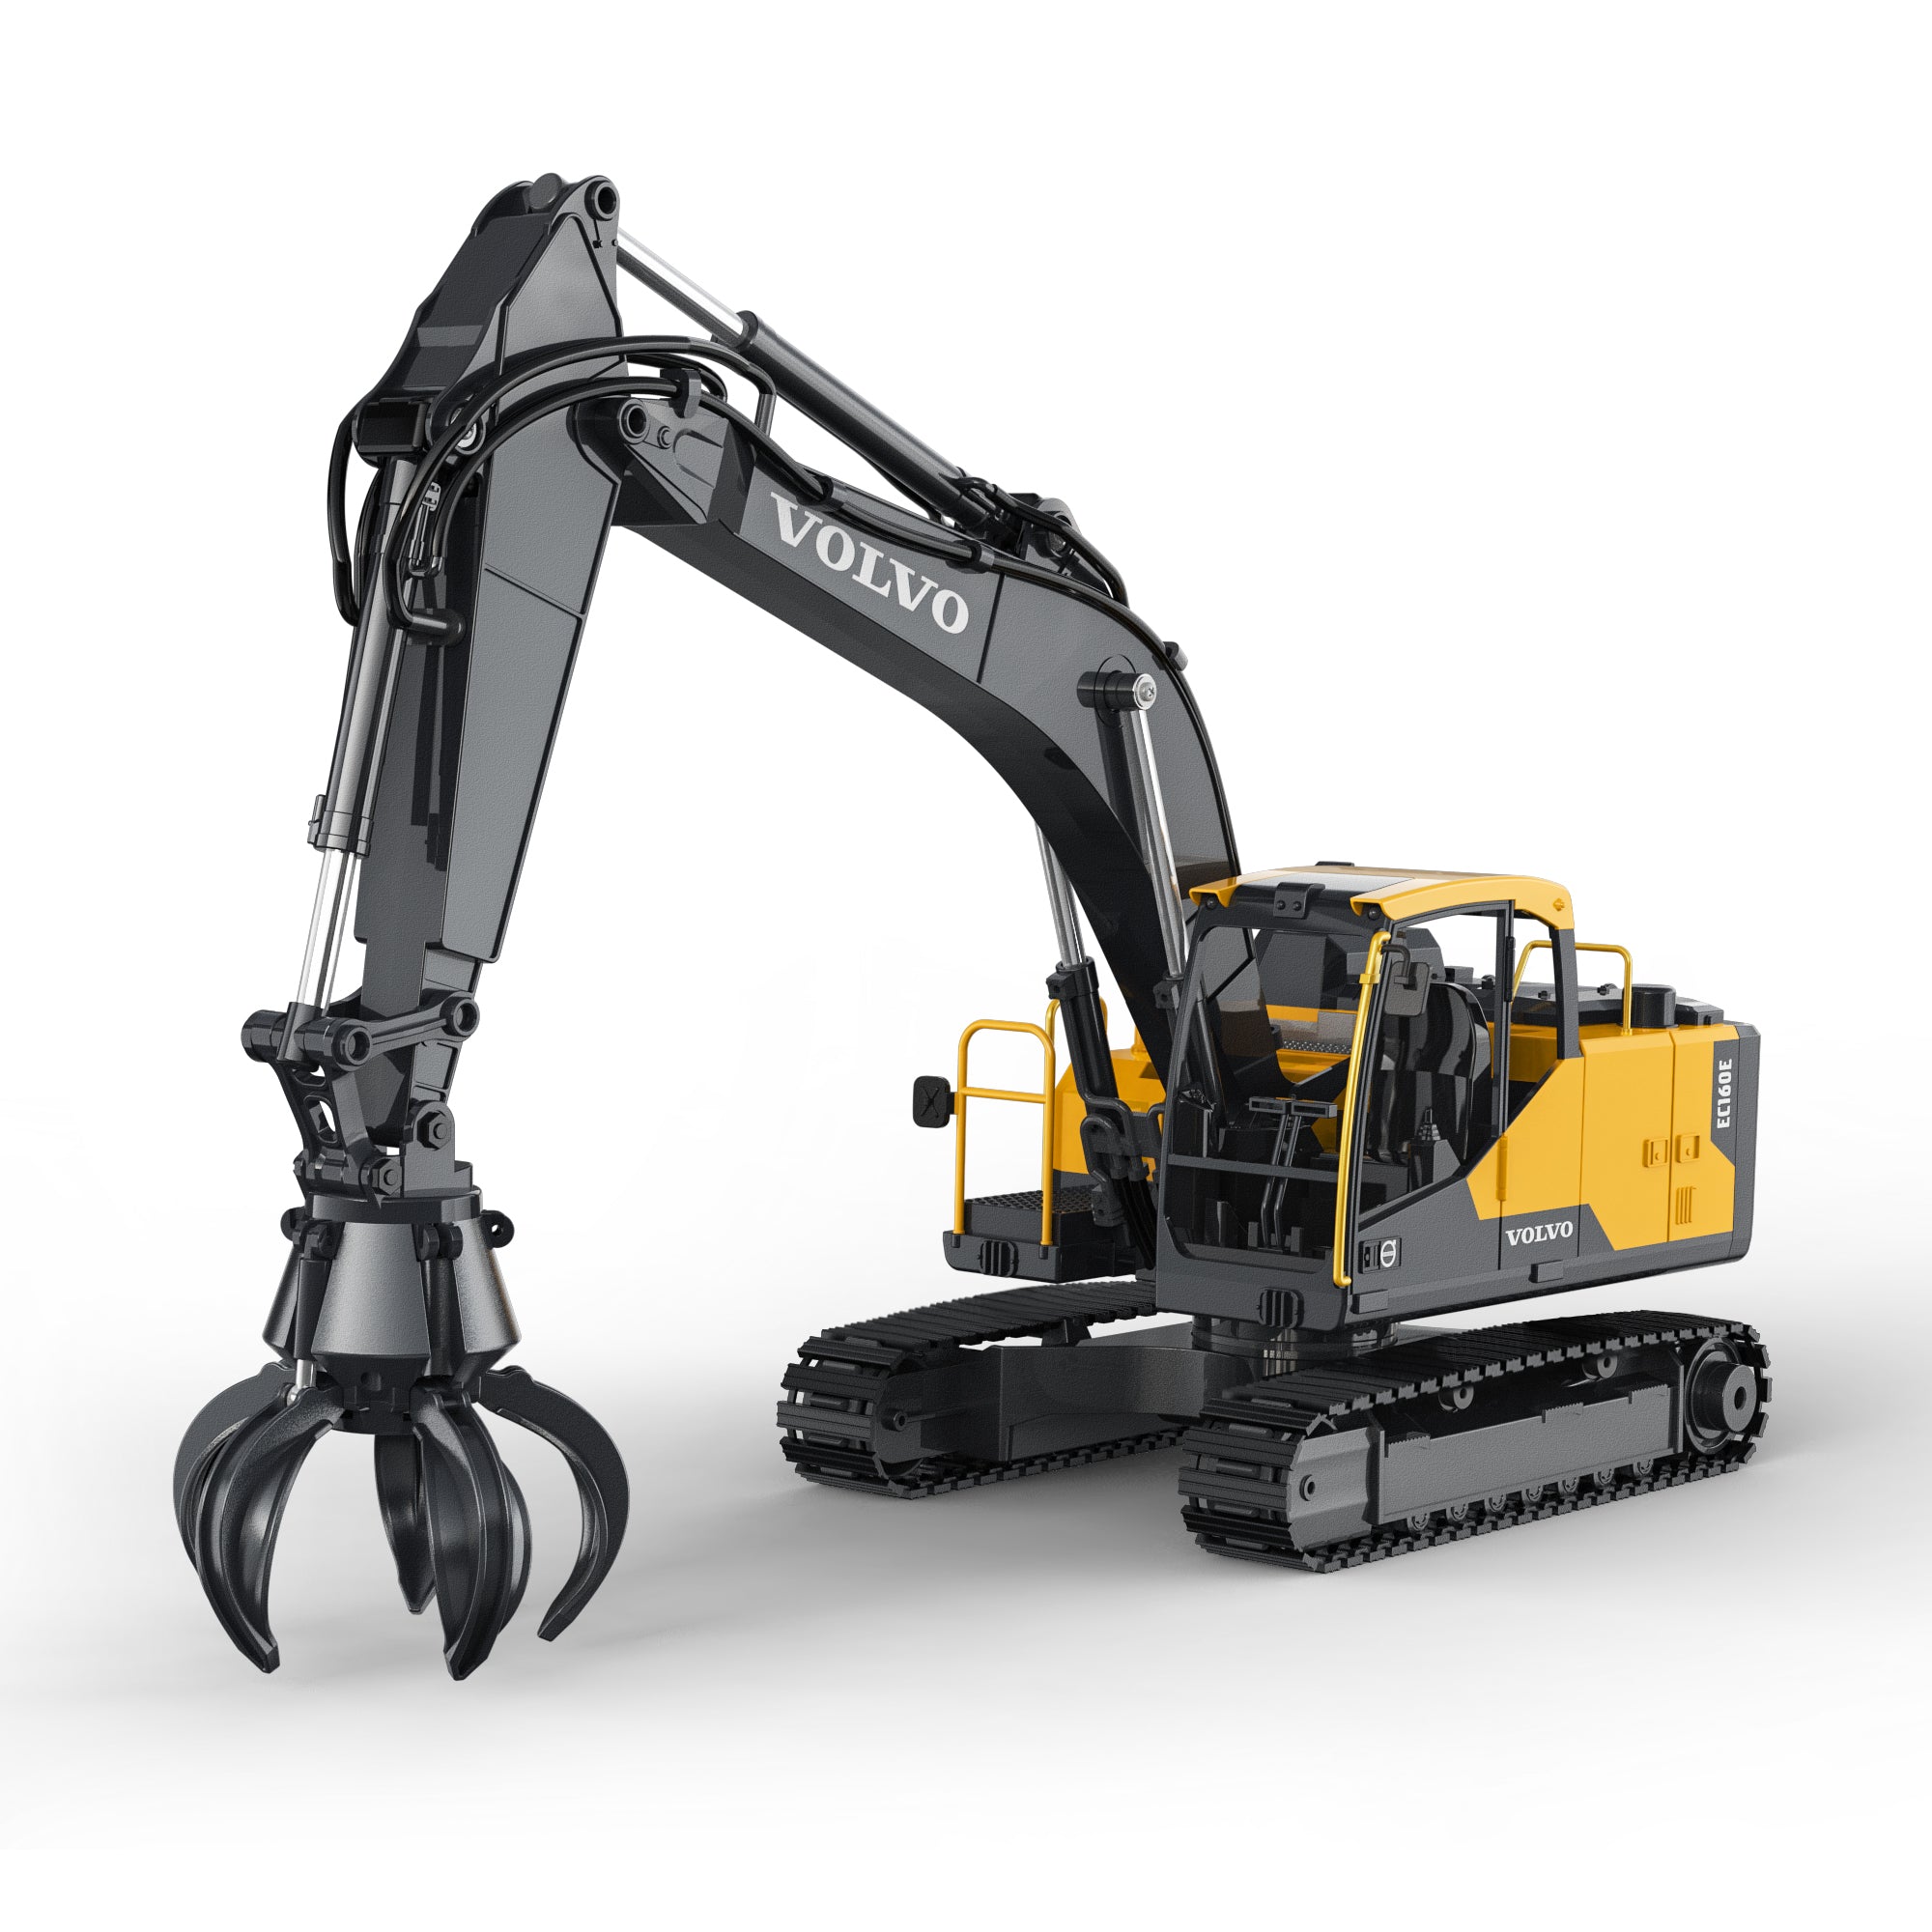 Double E VOLVO RC Fully Functional Excavator | E598-003